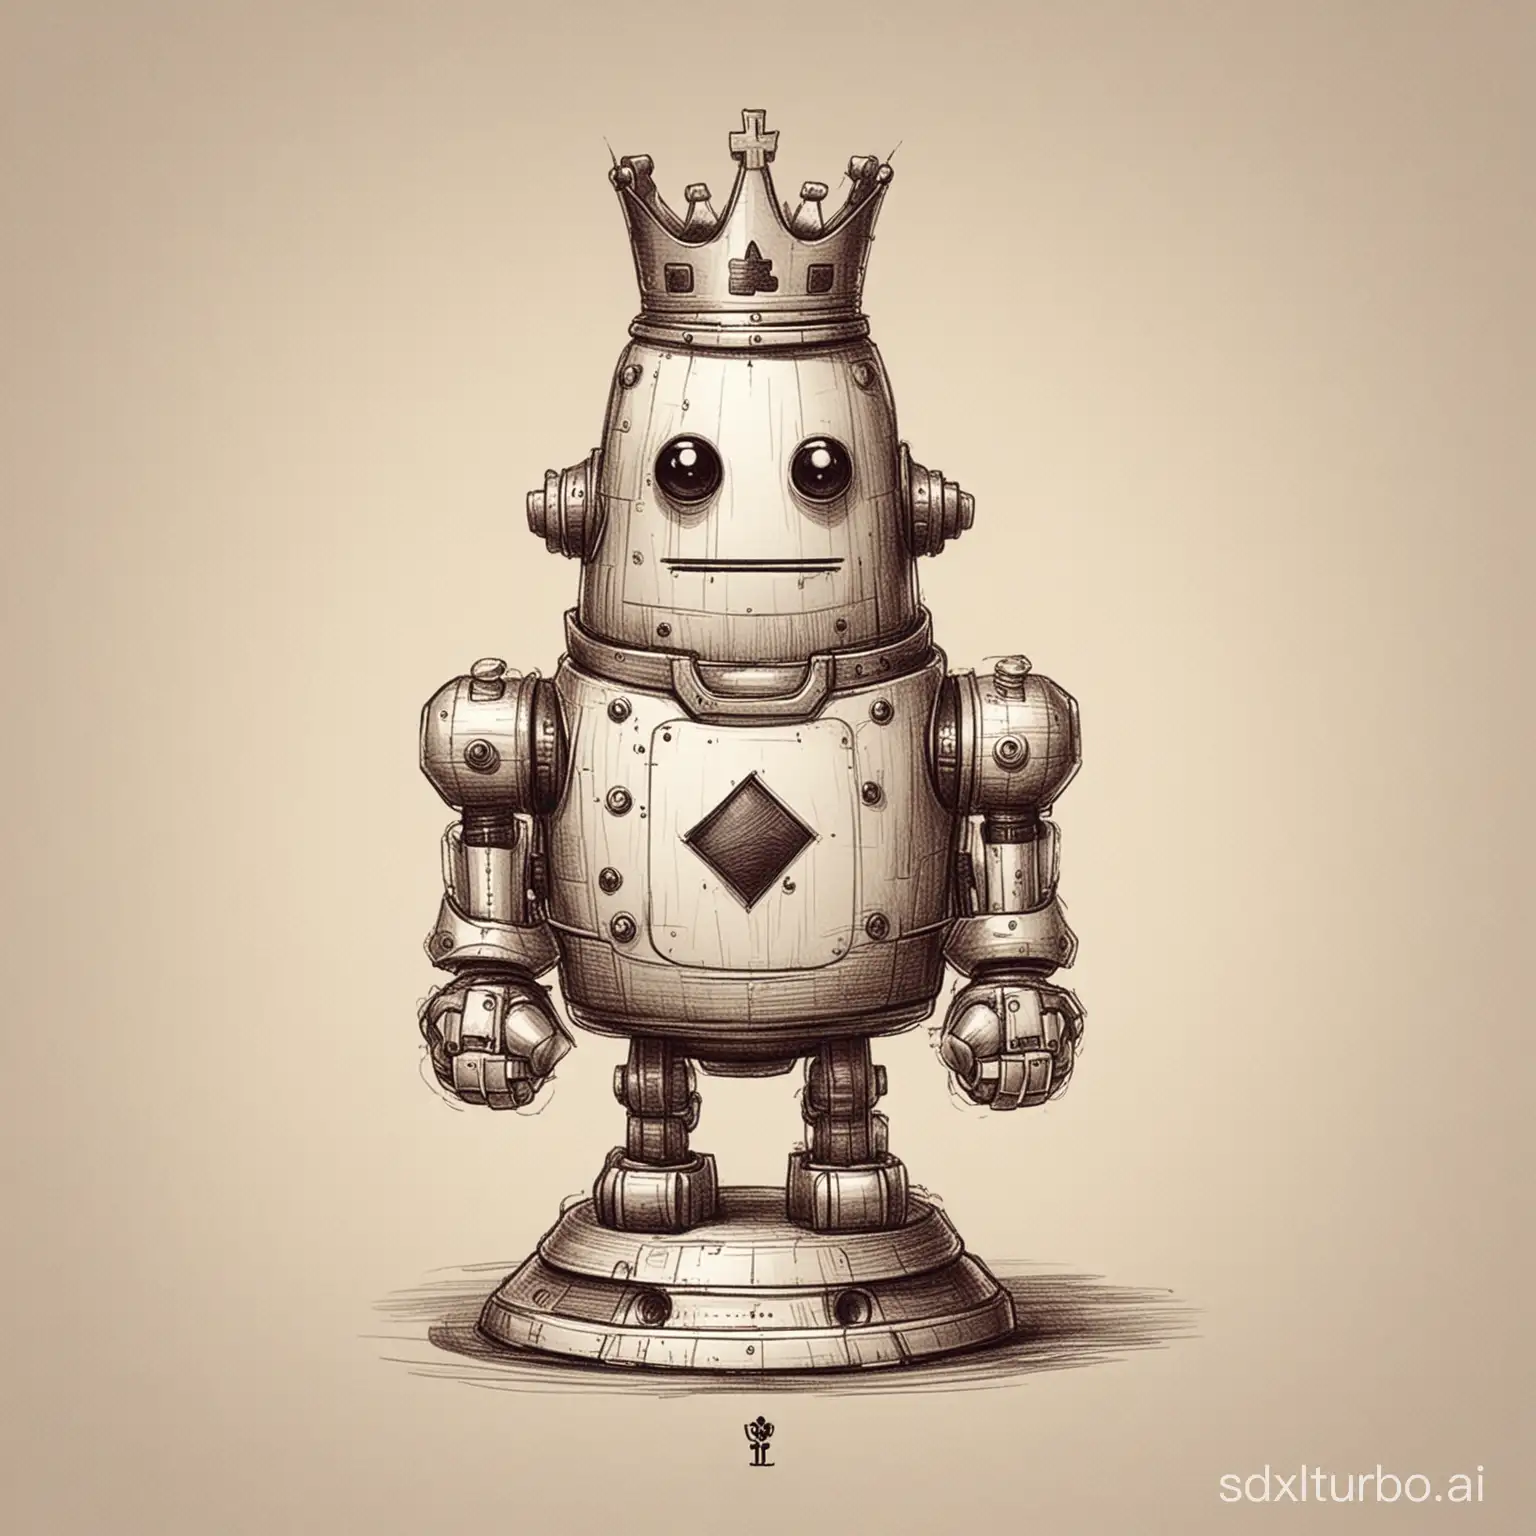 Cute-Chess-Robot-King-Playful-Fusion-of-Chess-and-Robotics